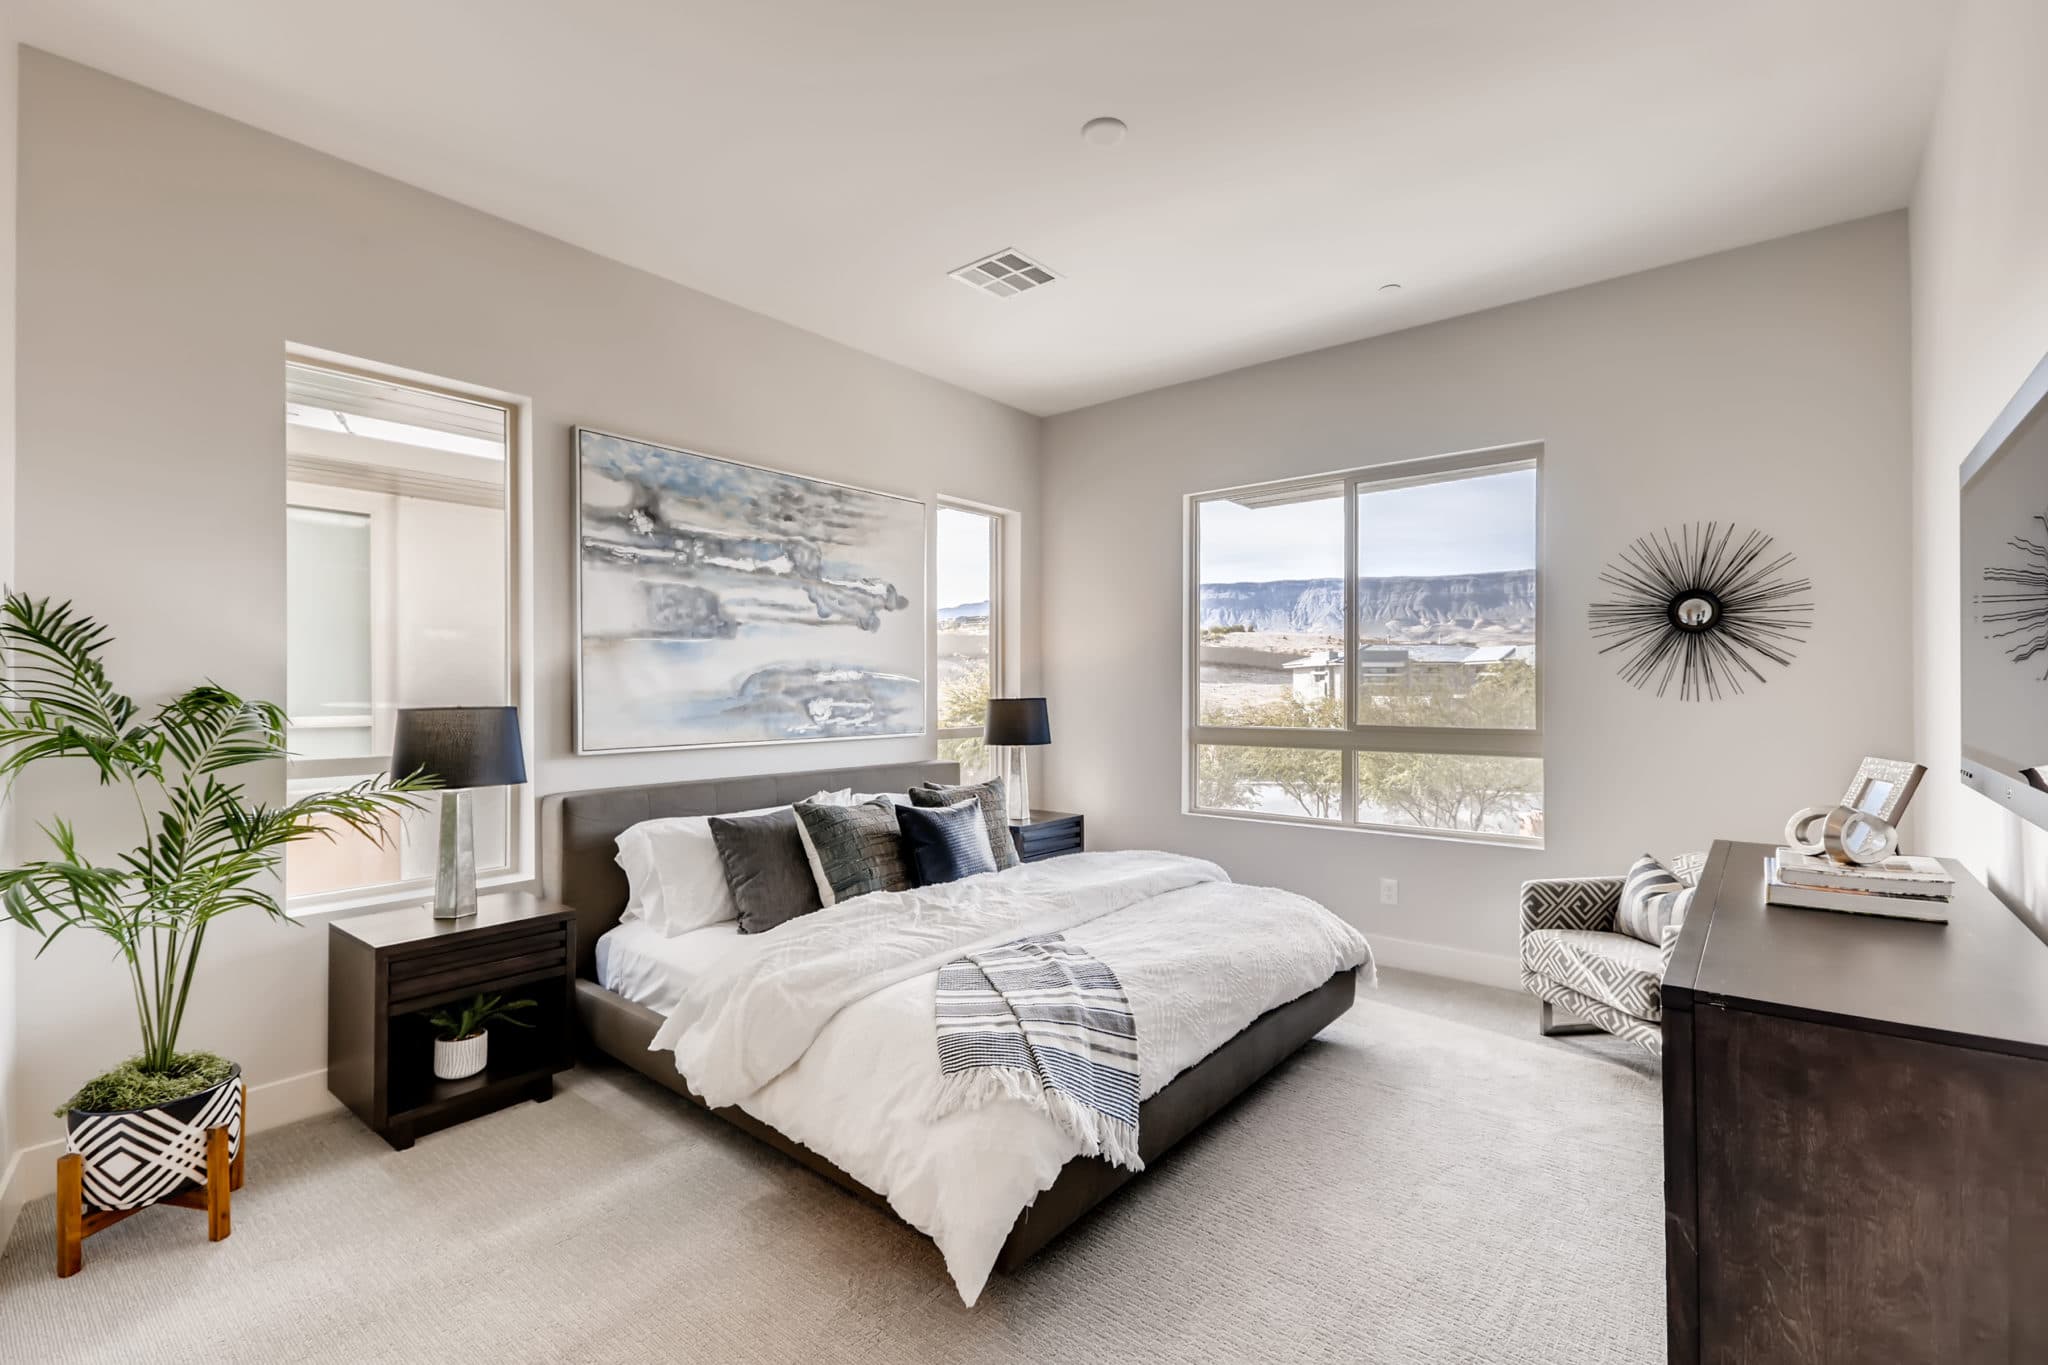 Master in Summit in Modern Collection in Trilogy by Shea Homes in South Square in Summerlin